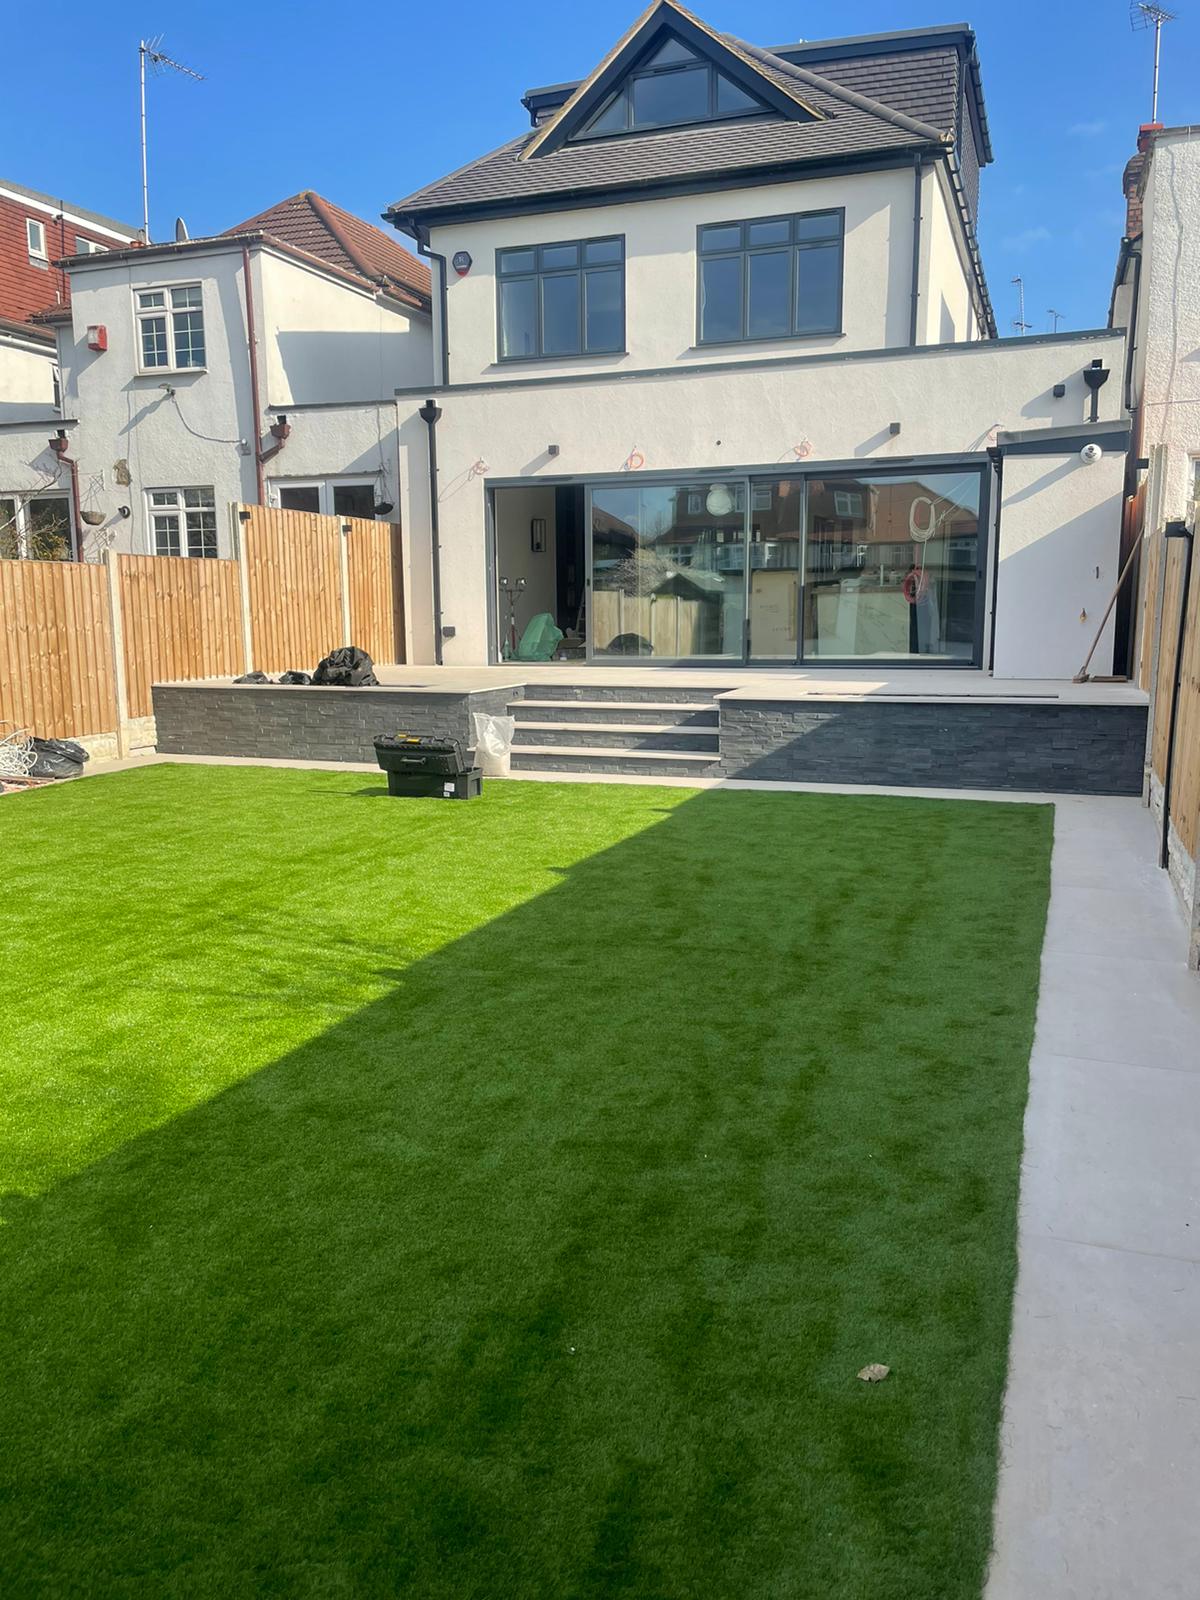 Advantages of Dog Friendly Artificial Grass for Your Home